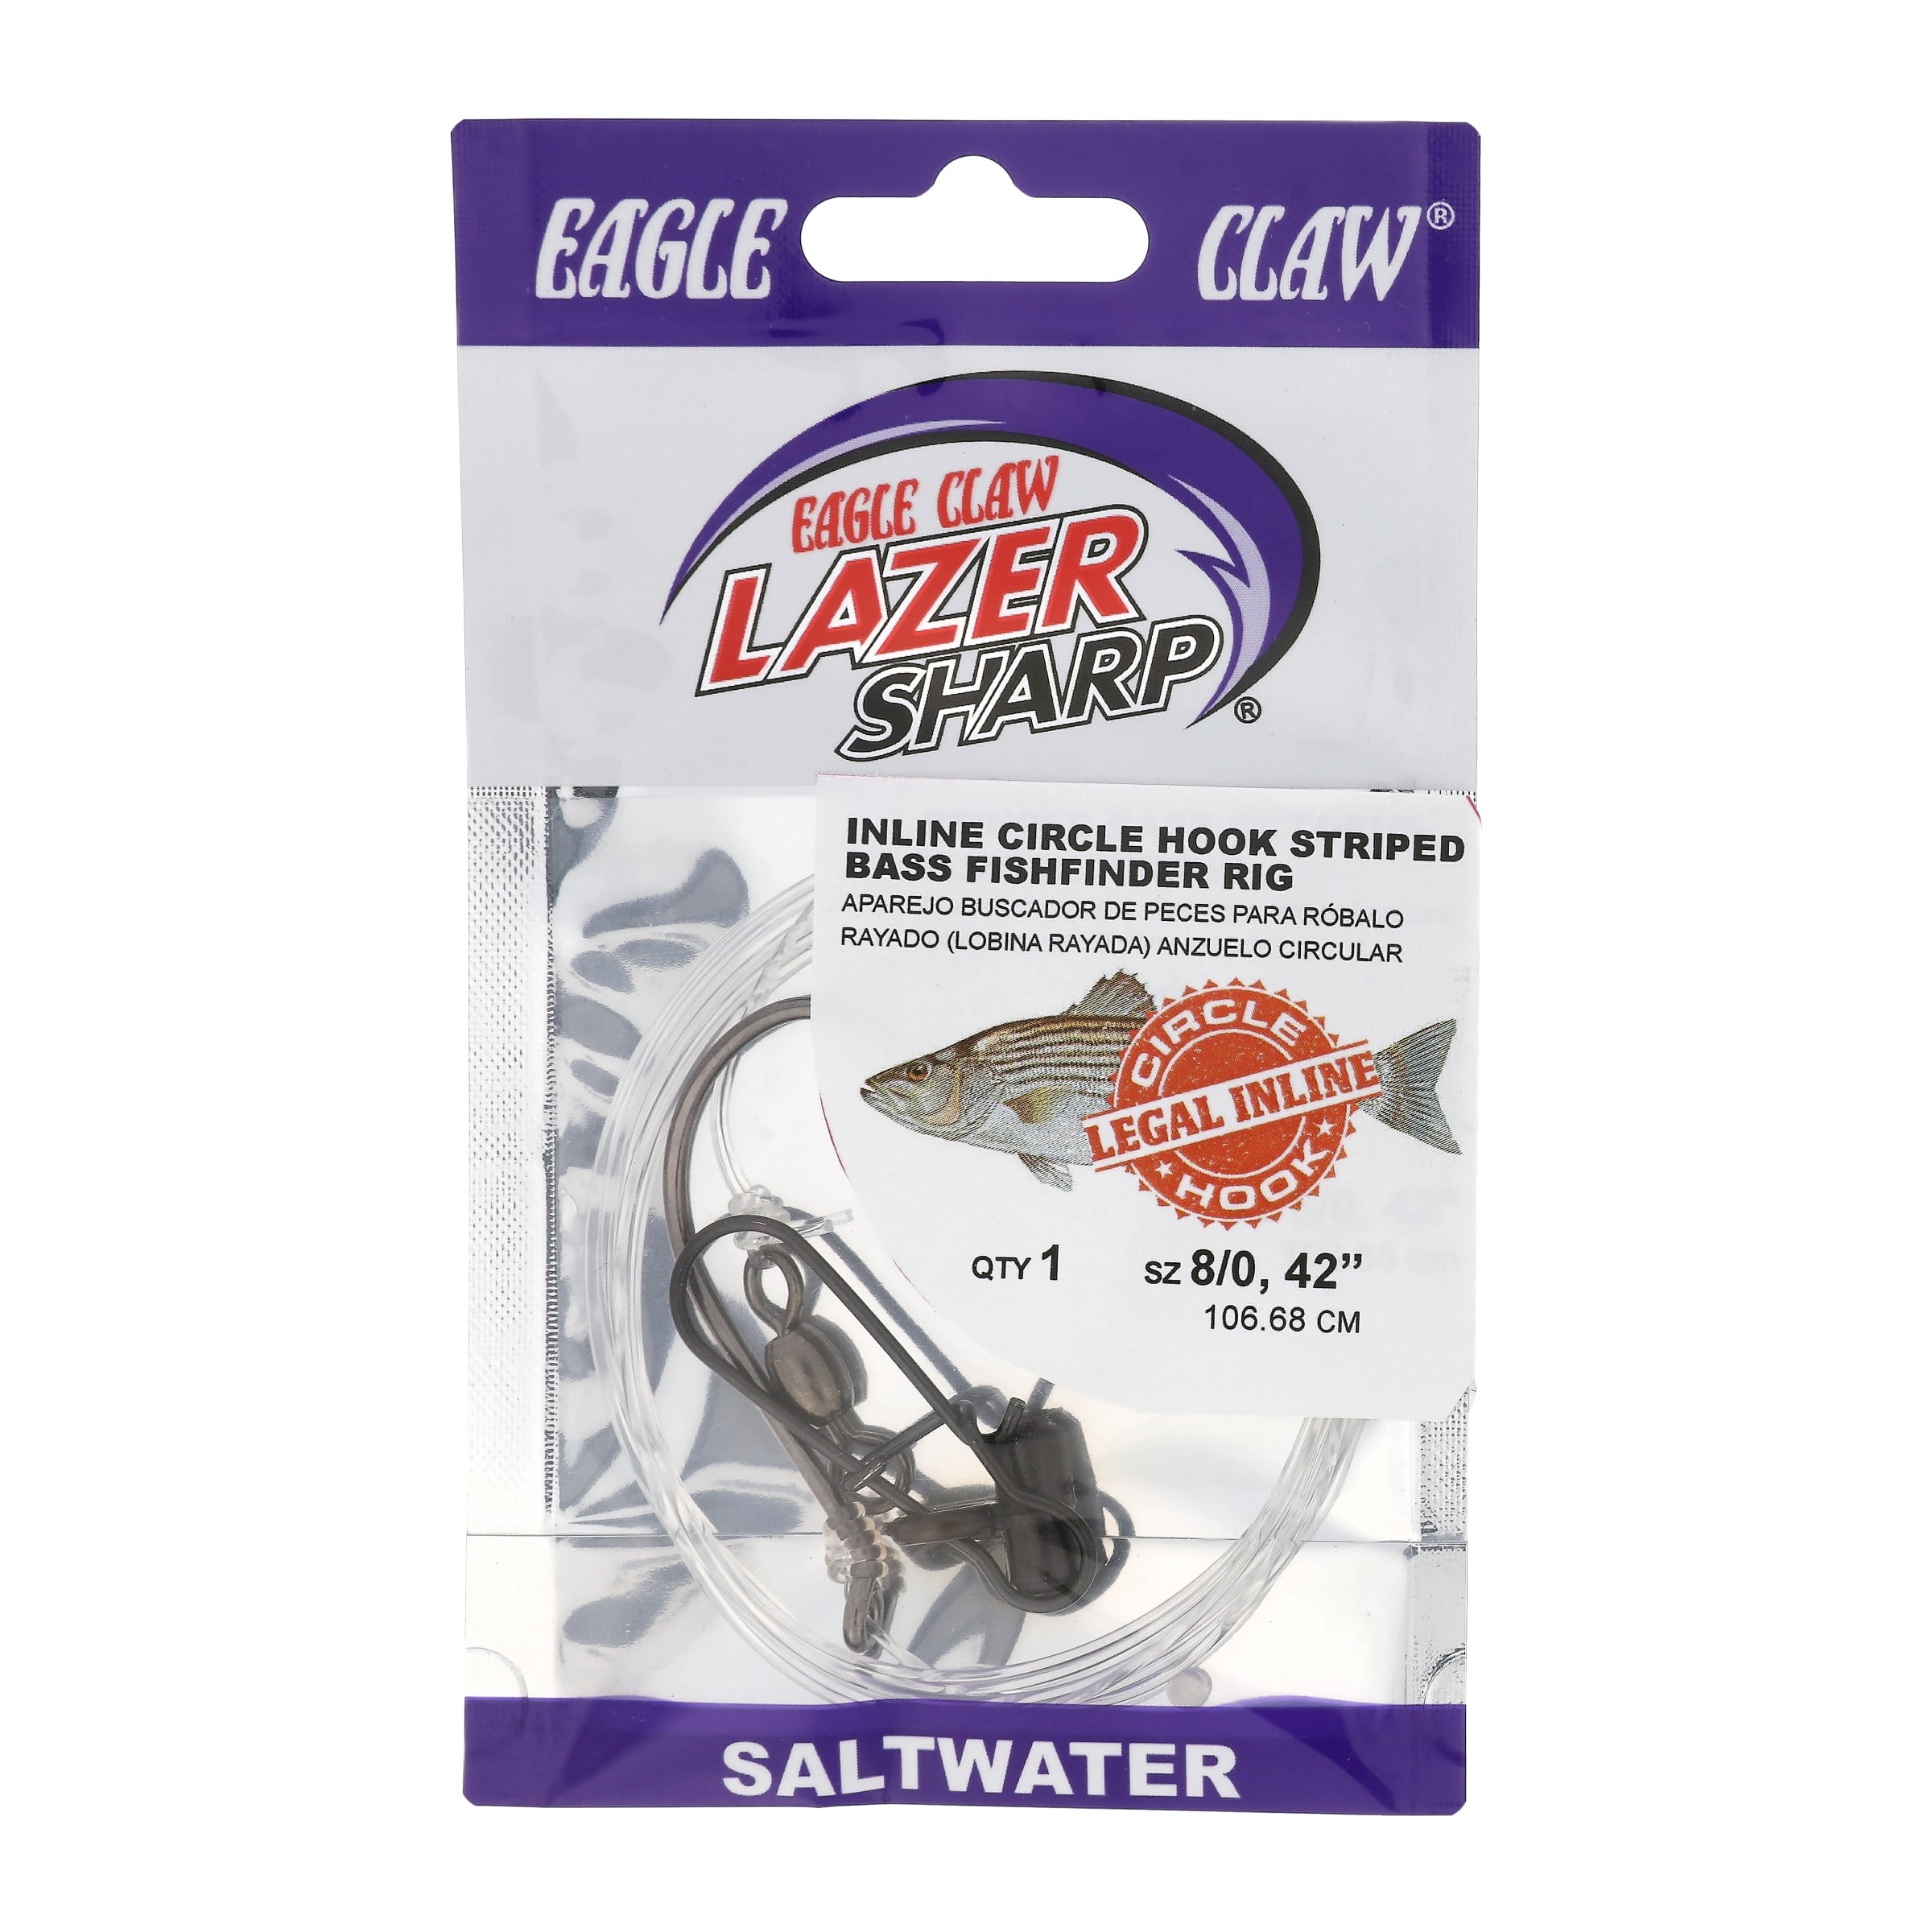 Buy Rite Angler Products Online in Muscat at Best Prices on